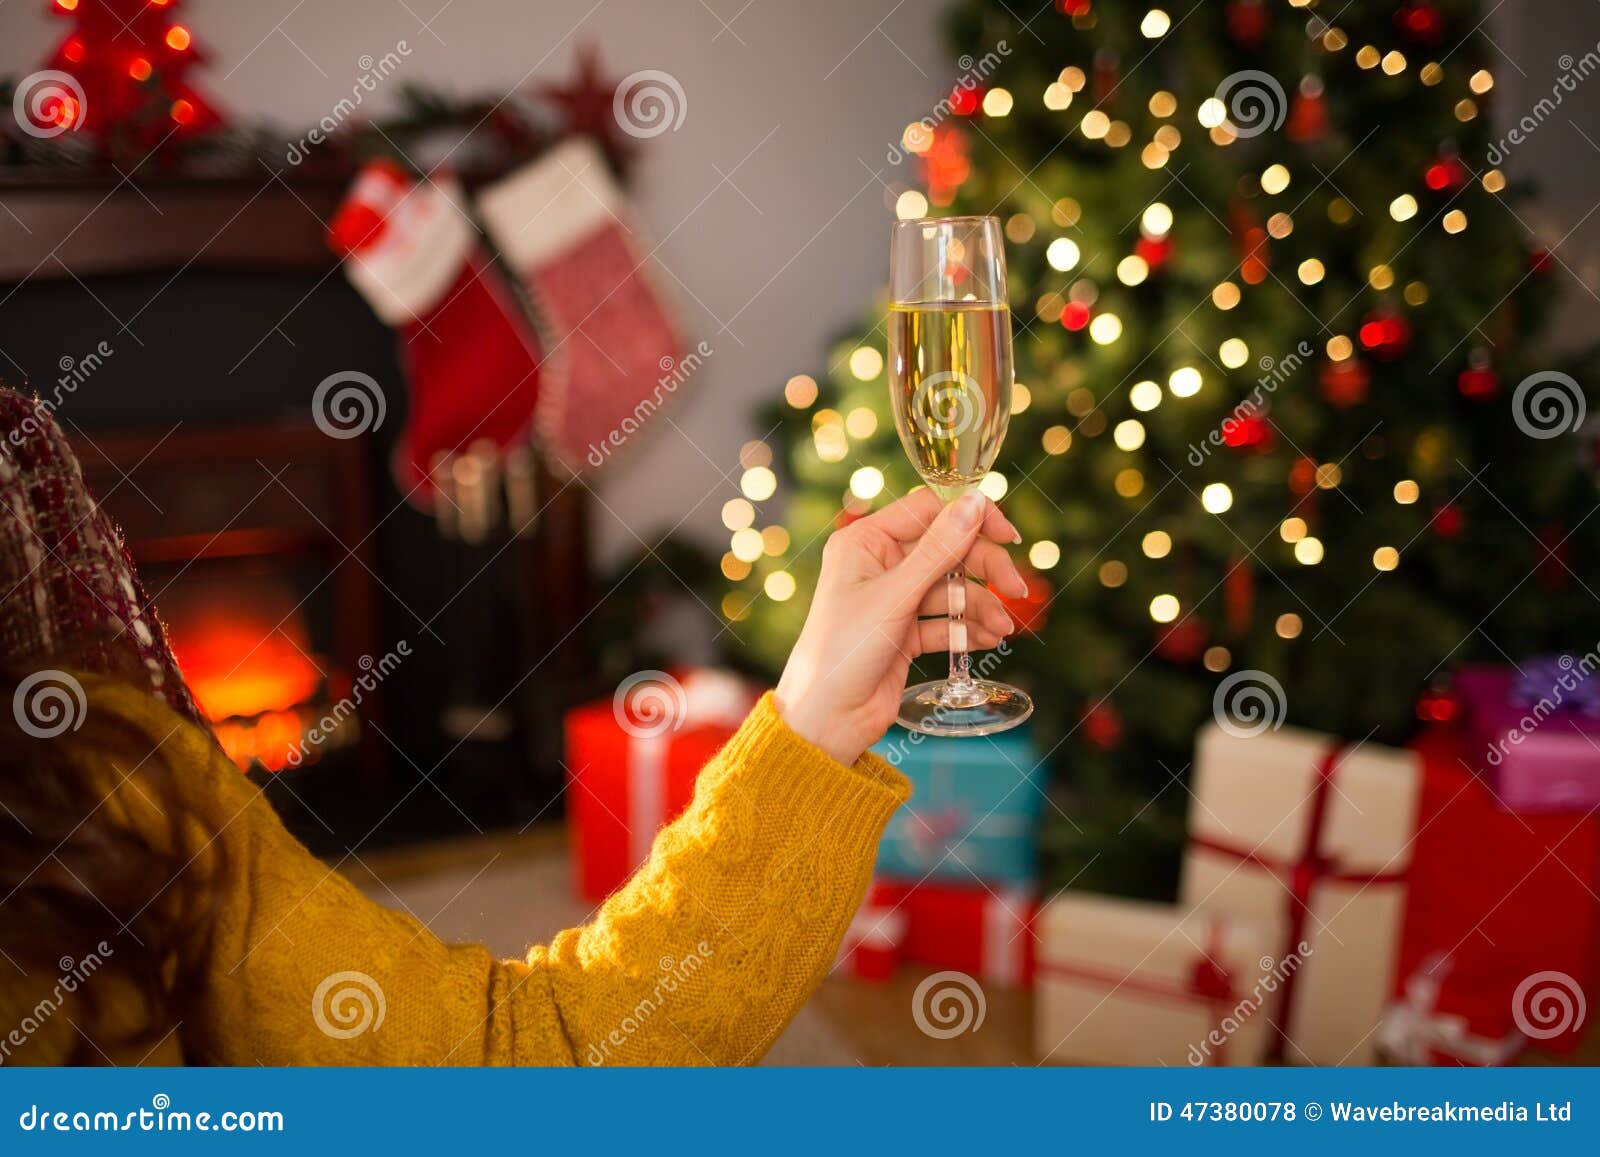 Redhead Holding Glass of Champagne on Couch at Christmas Stock Photo ...